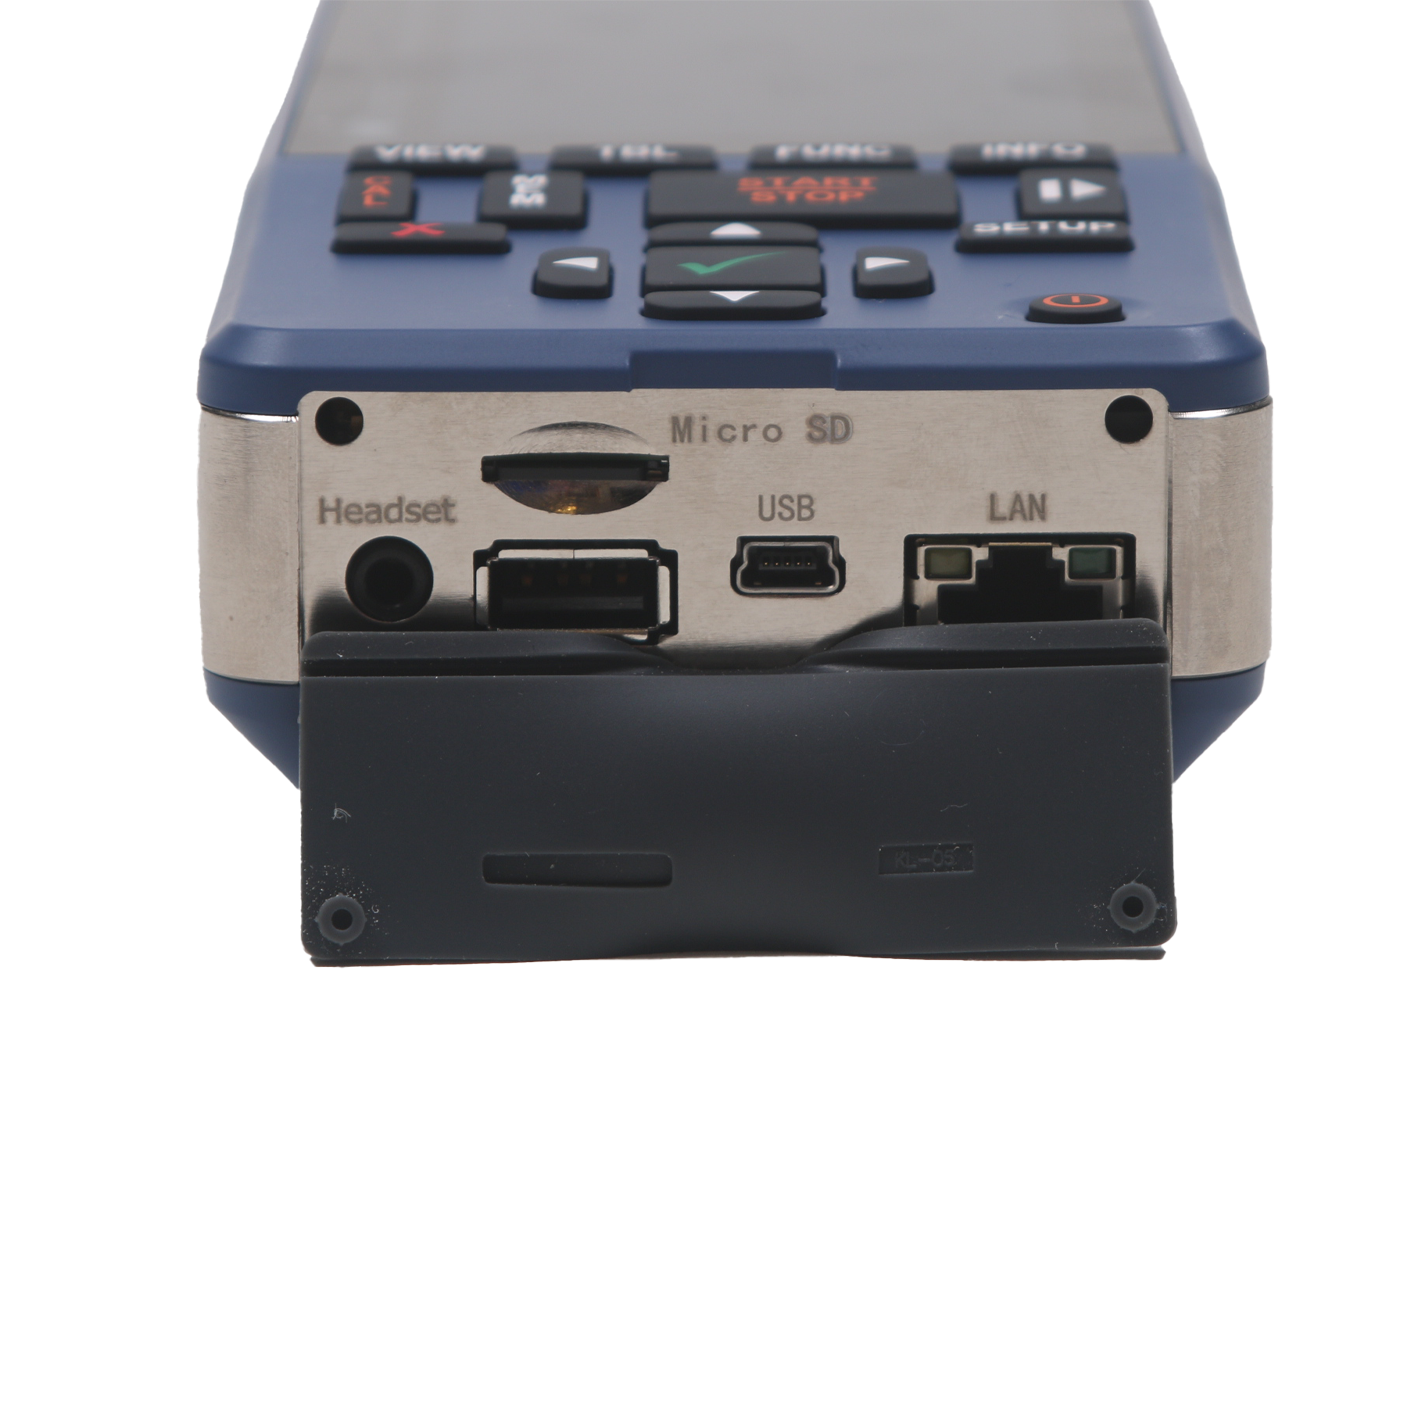 Norsonic Nor150 sound and vibration analyser - connections for headset, USB,LAN and Micro SD